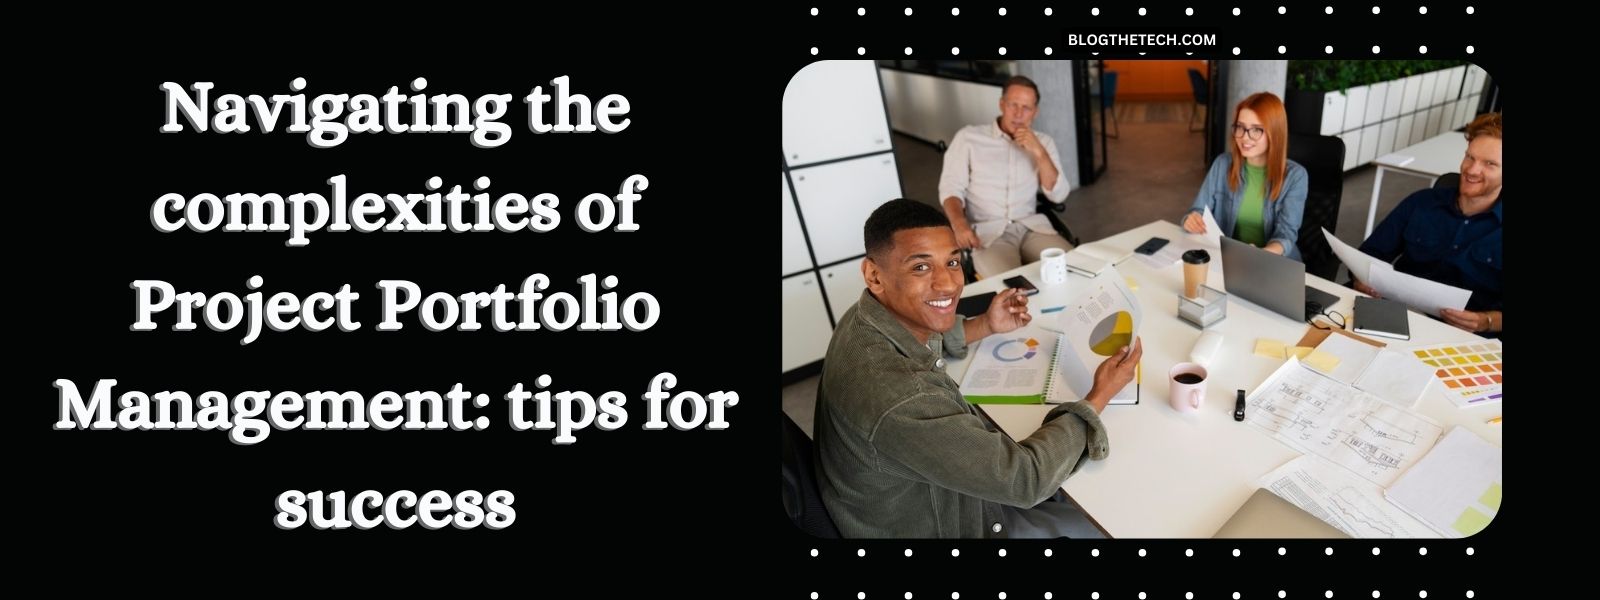 Navigating the complexities of Project Portfolio Management: tips for success